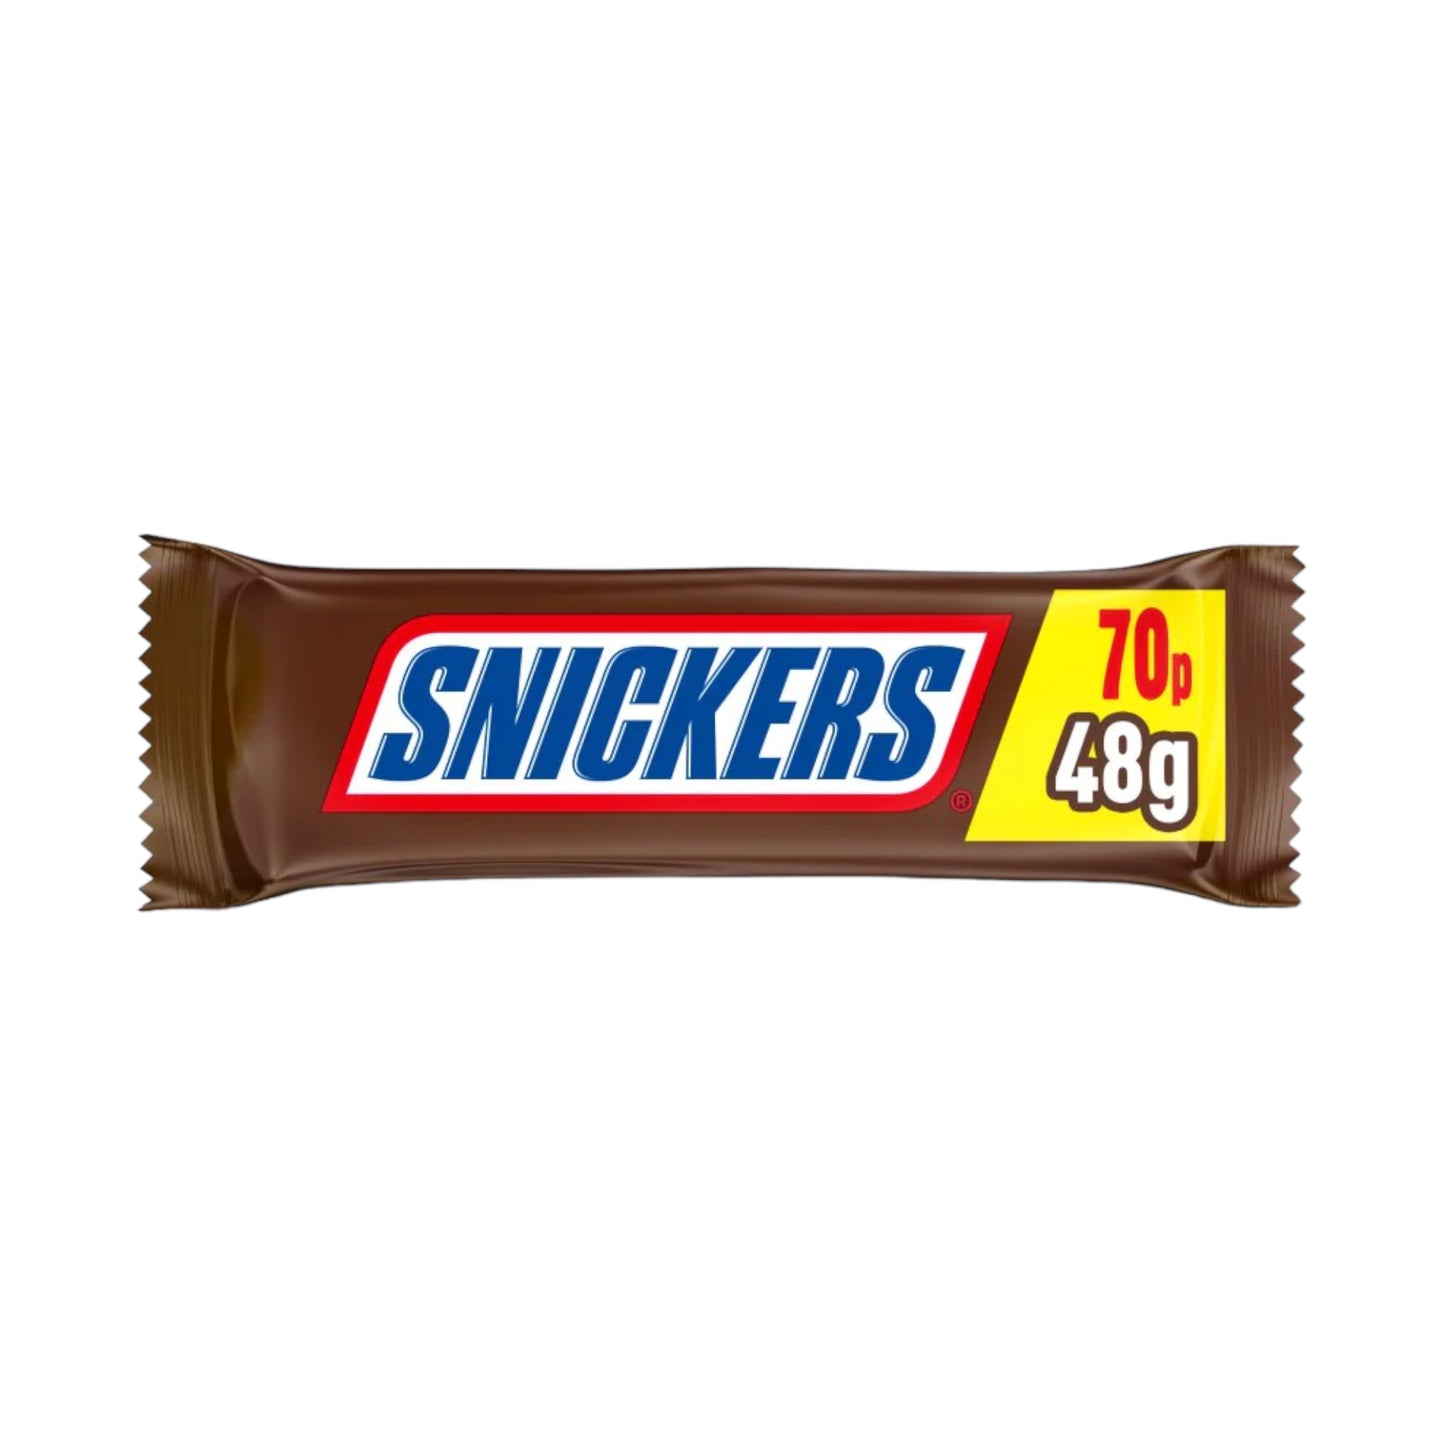 Snickers Chocolate Bars - 48g (PMP 70P)